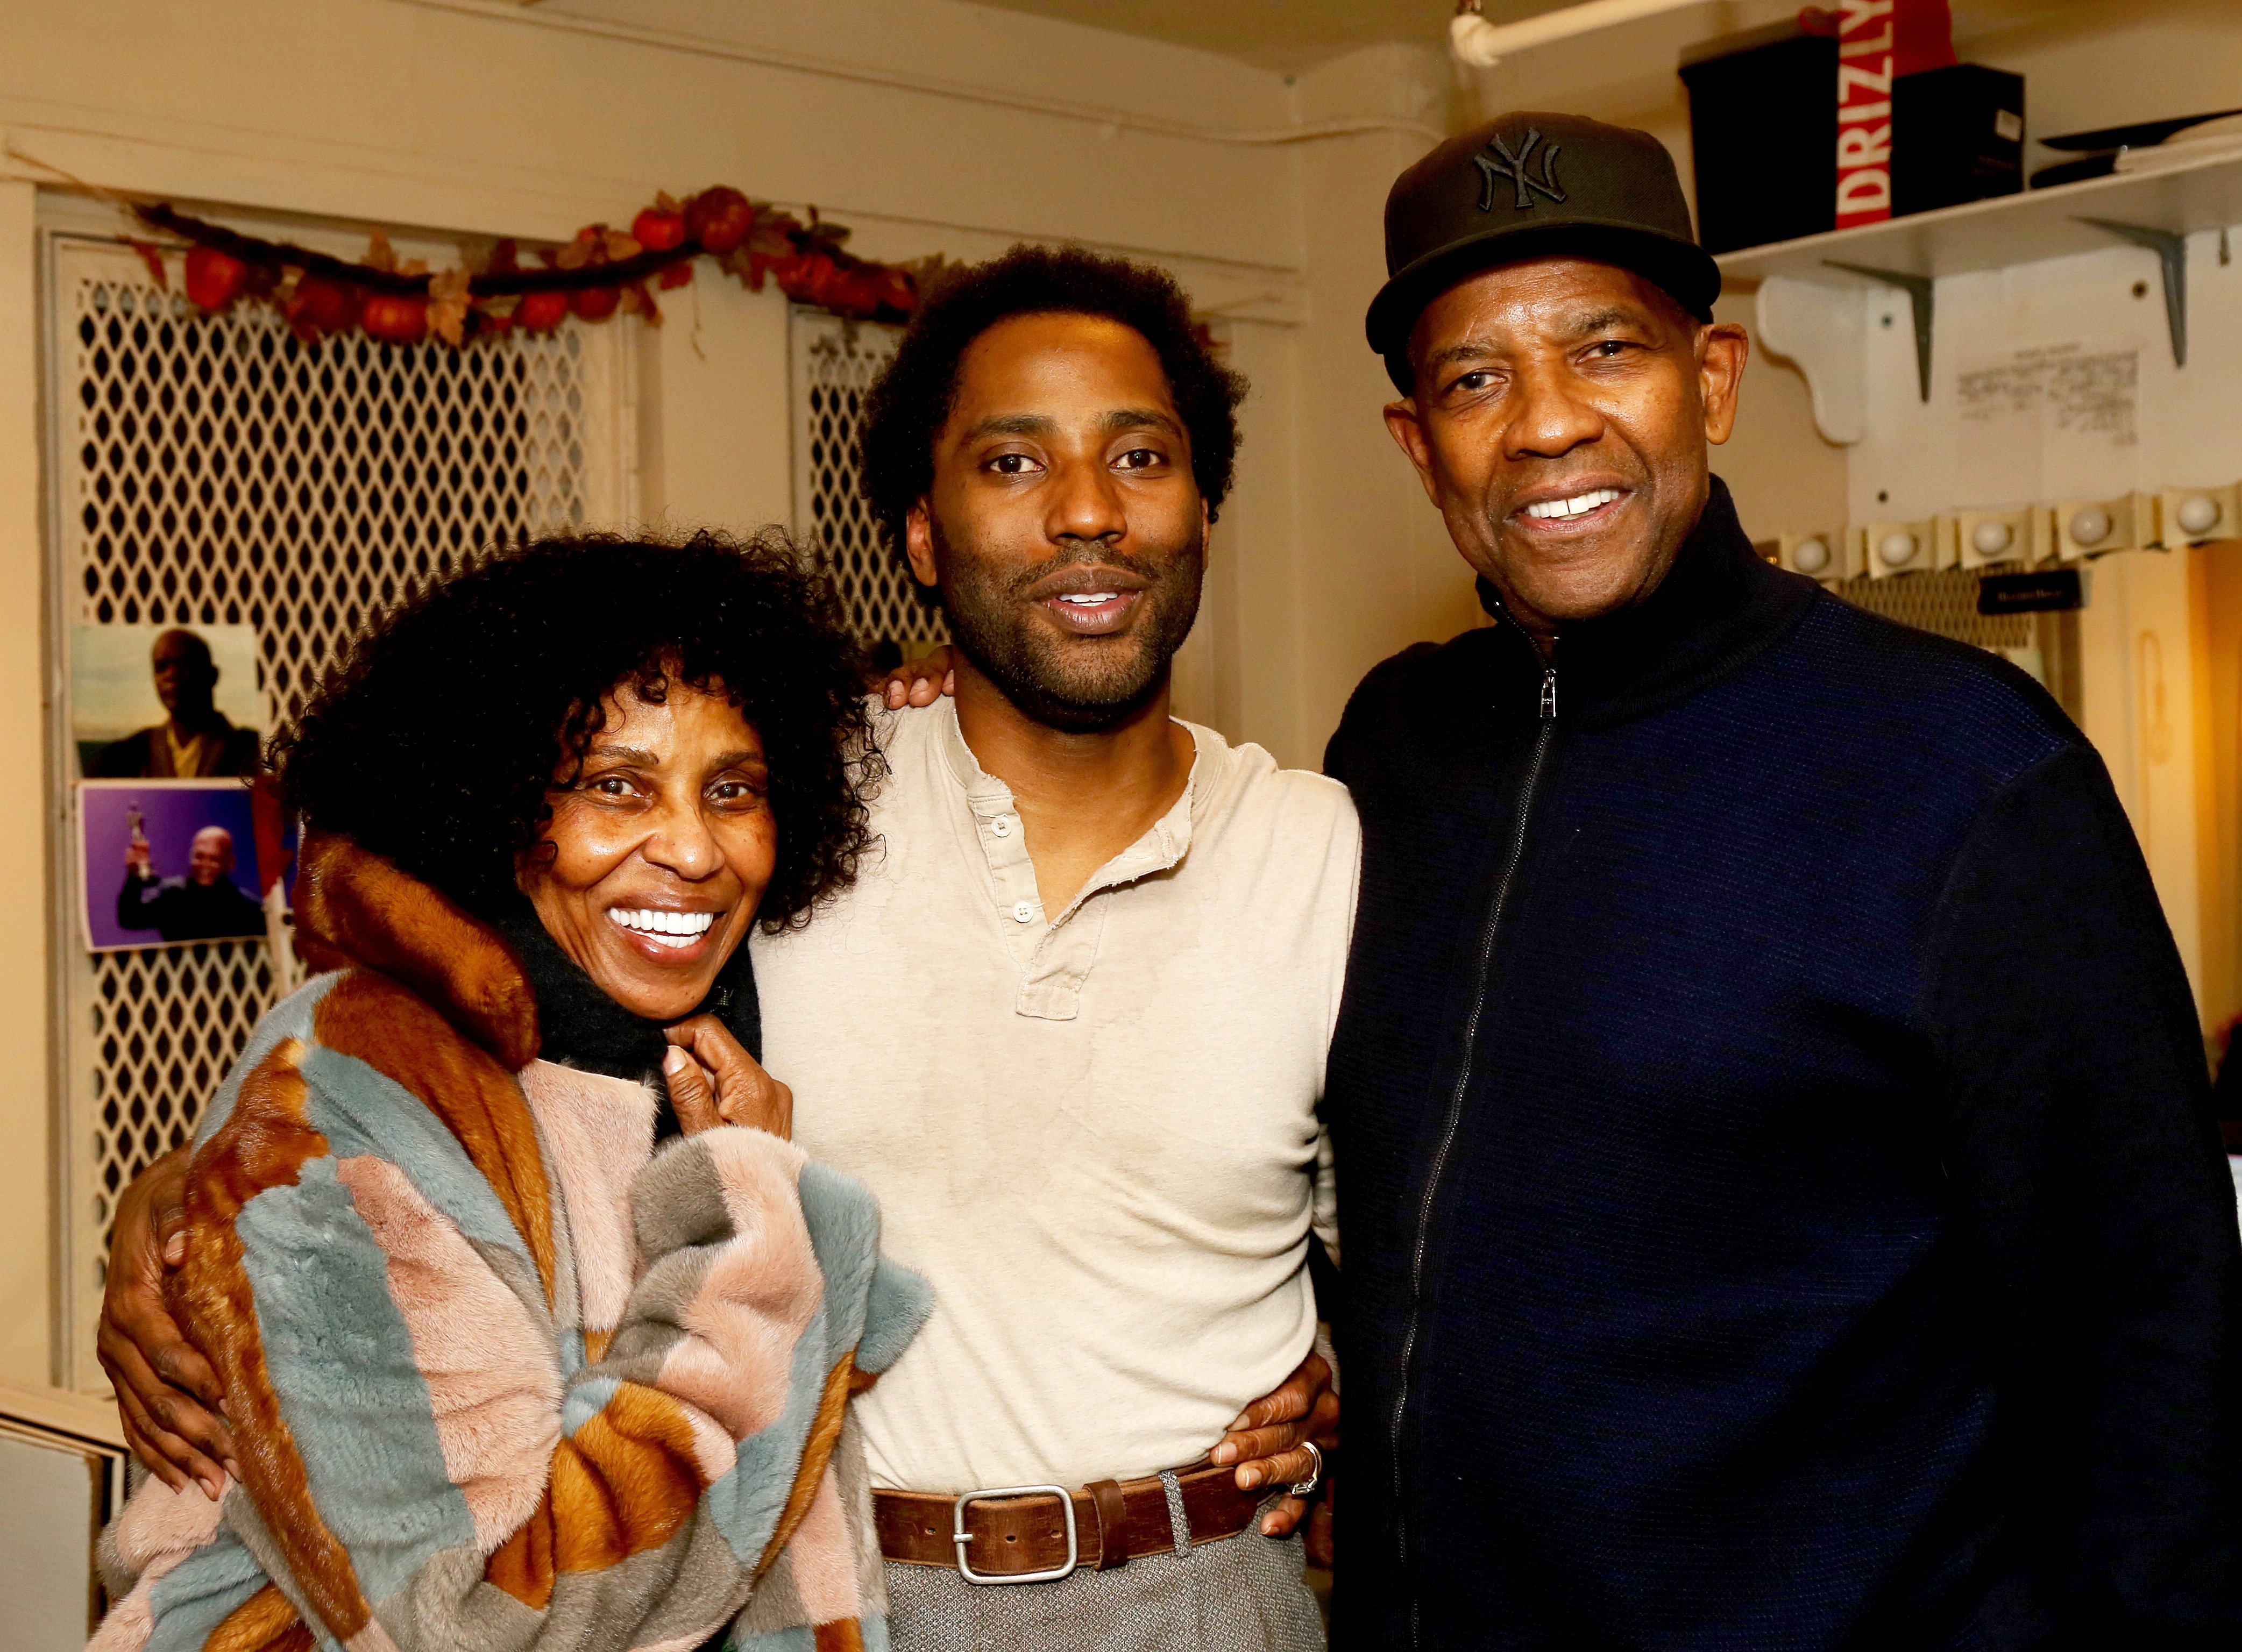 Pauletta Washington, son John David Washington, and father Denzel Washington pose at the backstage of the play "The Piano Lesson" on Broadway at The Barrymore Theater on November 18, 2022 in New York City. ┃Source: Getty Images